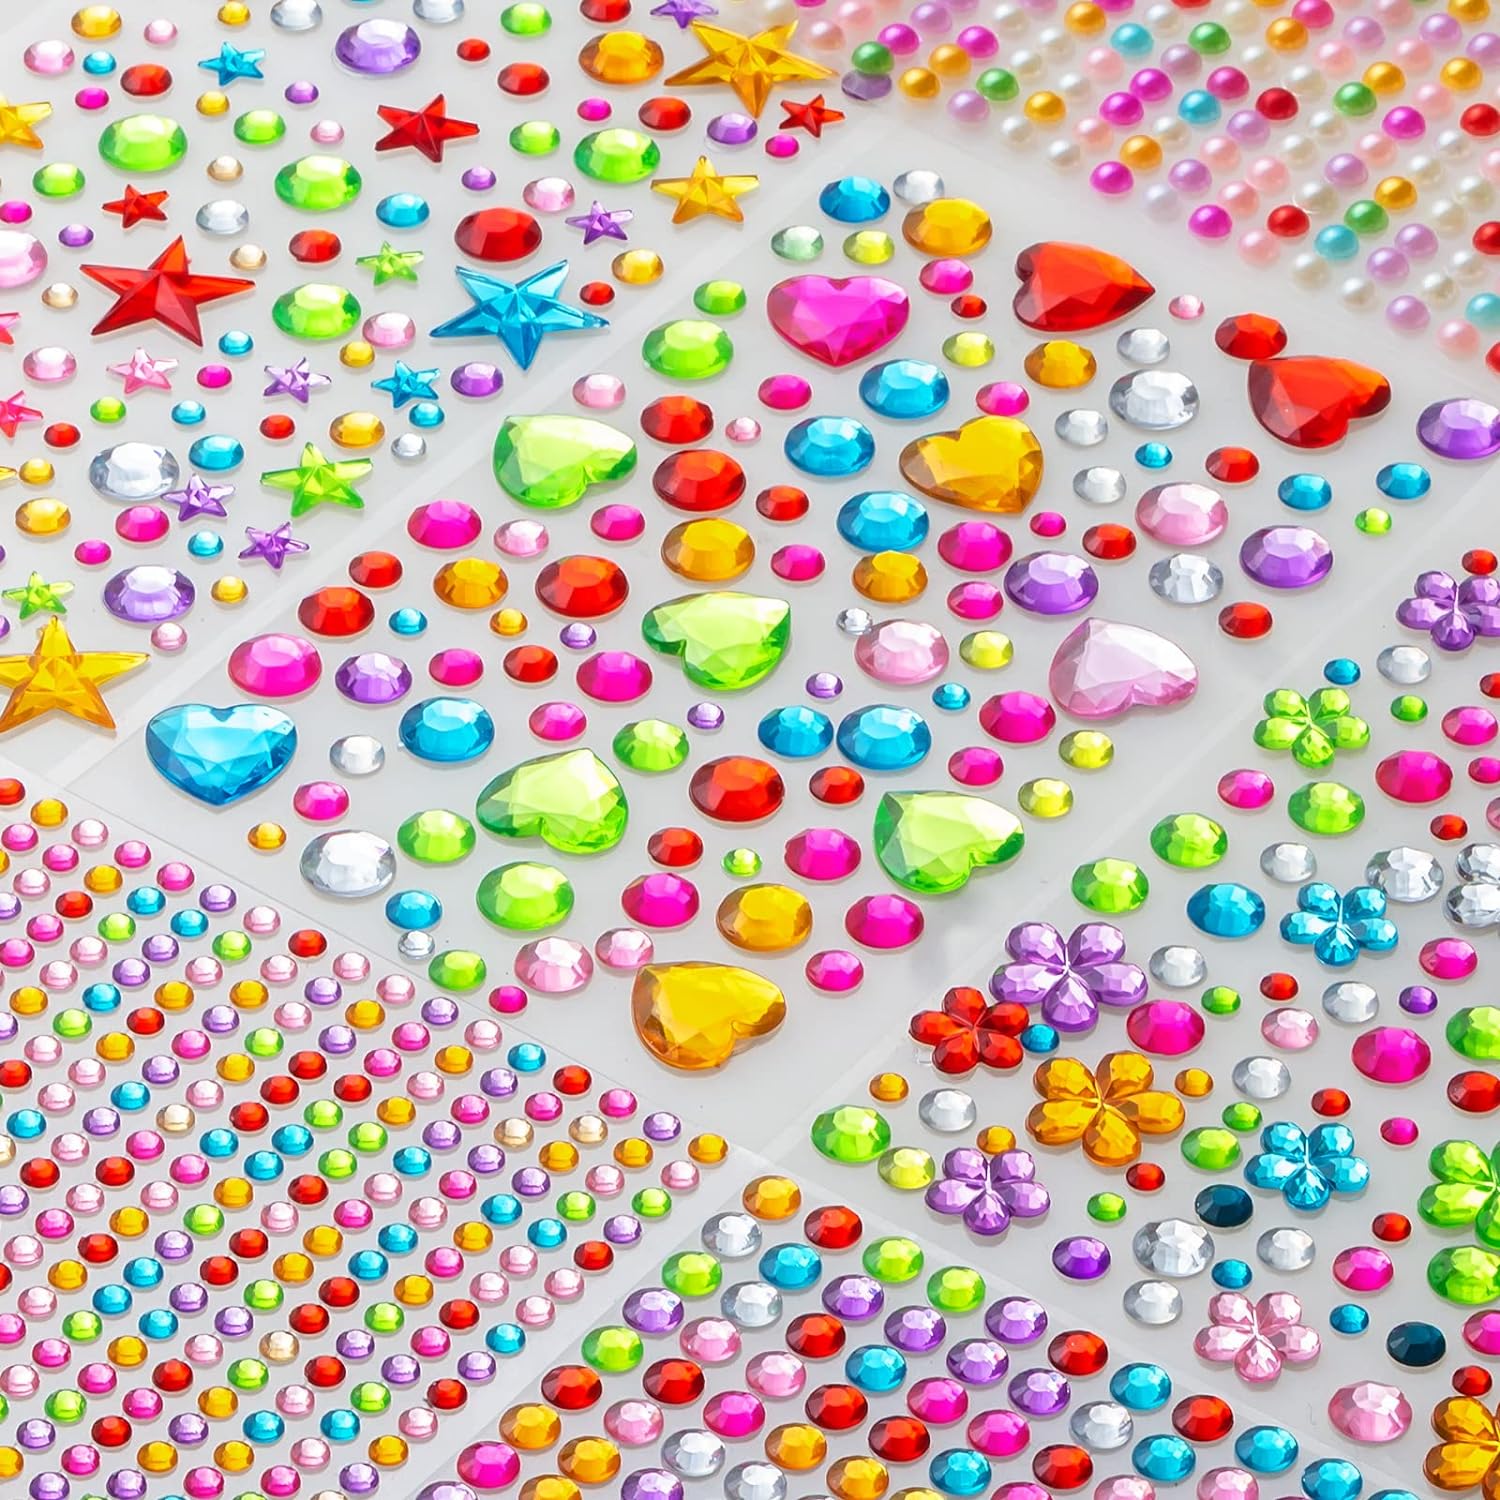 3000 Pcs 8 Sheets Rhinestones Stickers, 4 mm Face Jewels Rhinestones for  Makeup Self Adhesive Bling Gems Stick on Rhinestone for Hair Eyes Body  Crafts